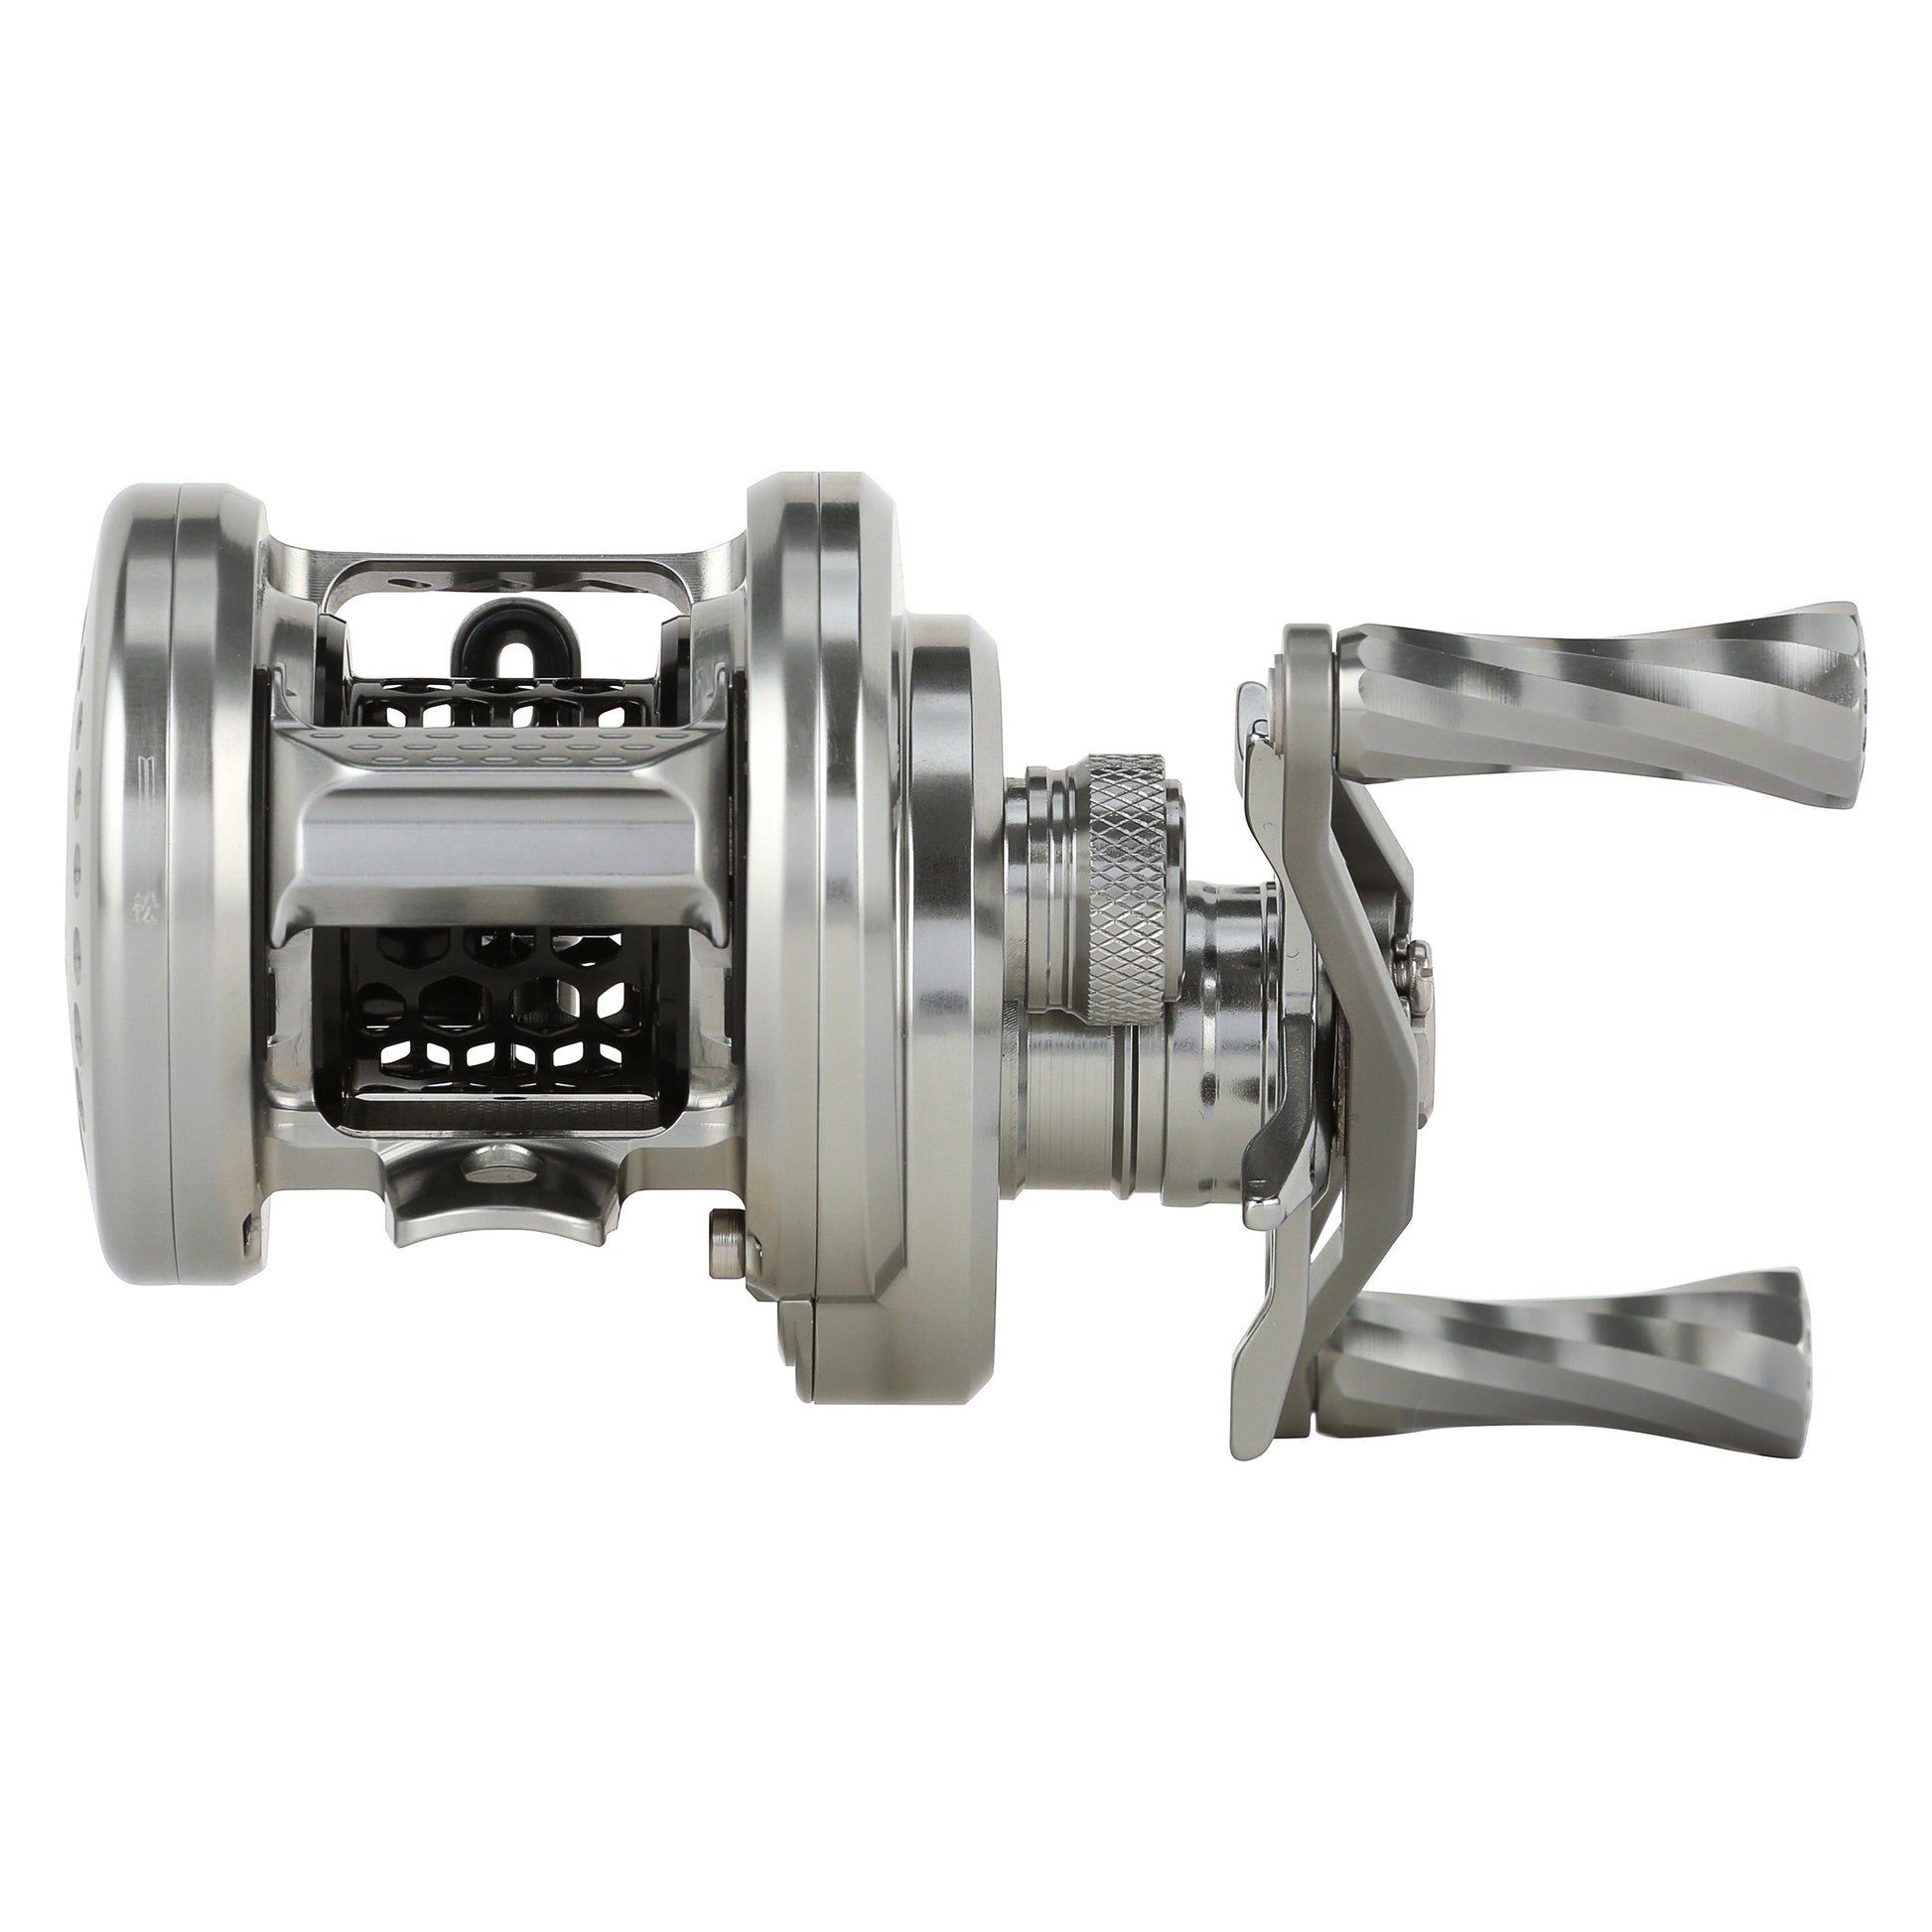 Loognze Roundcast DBC reel – Loongze USA